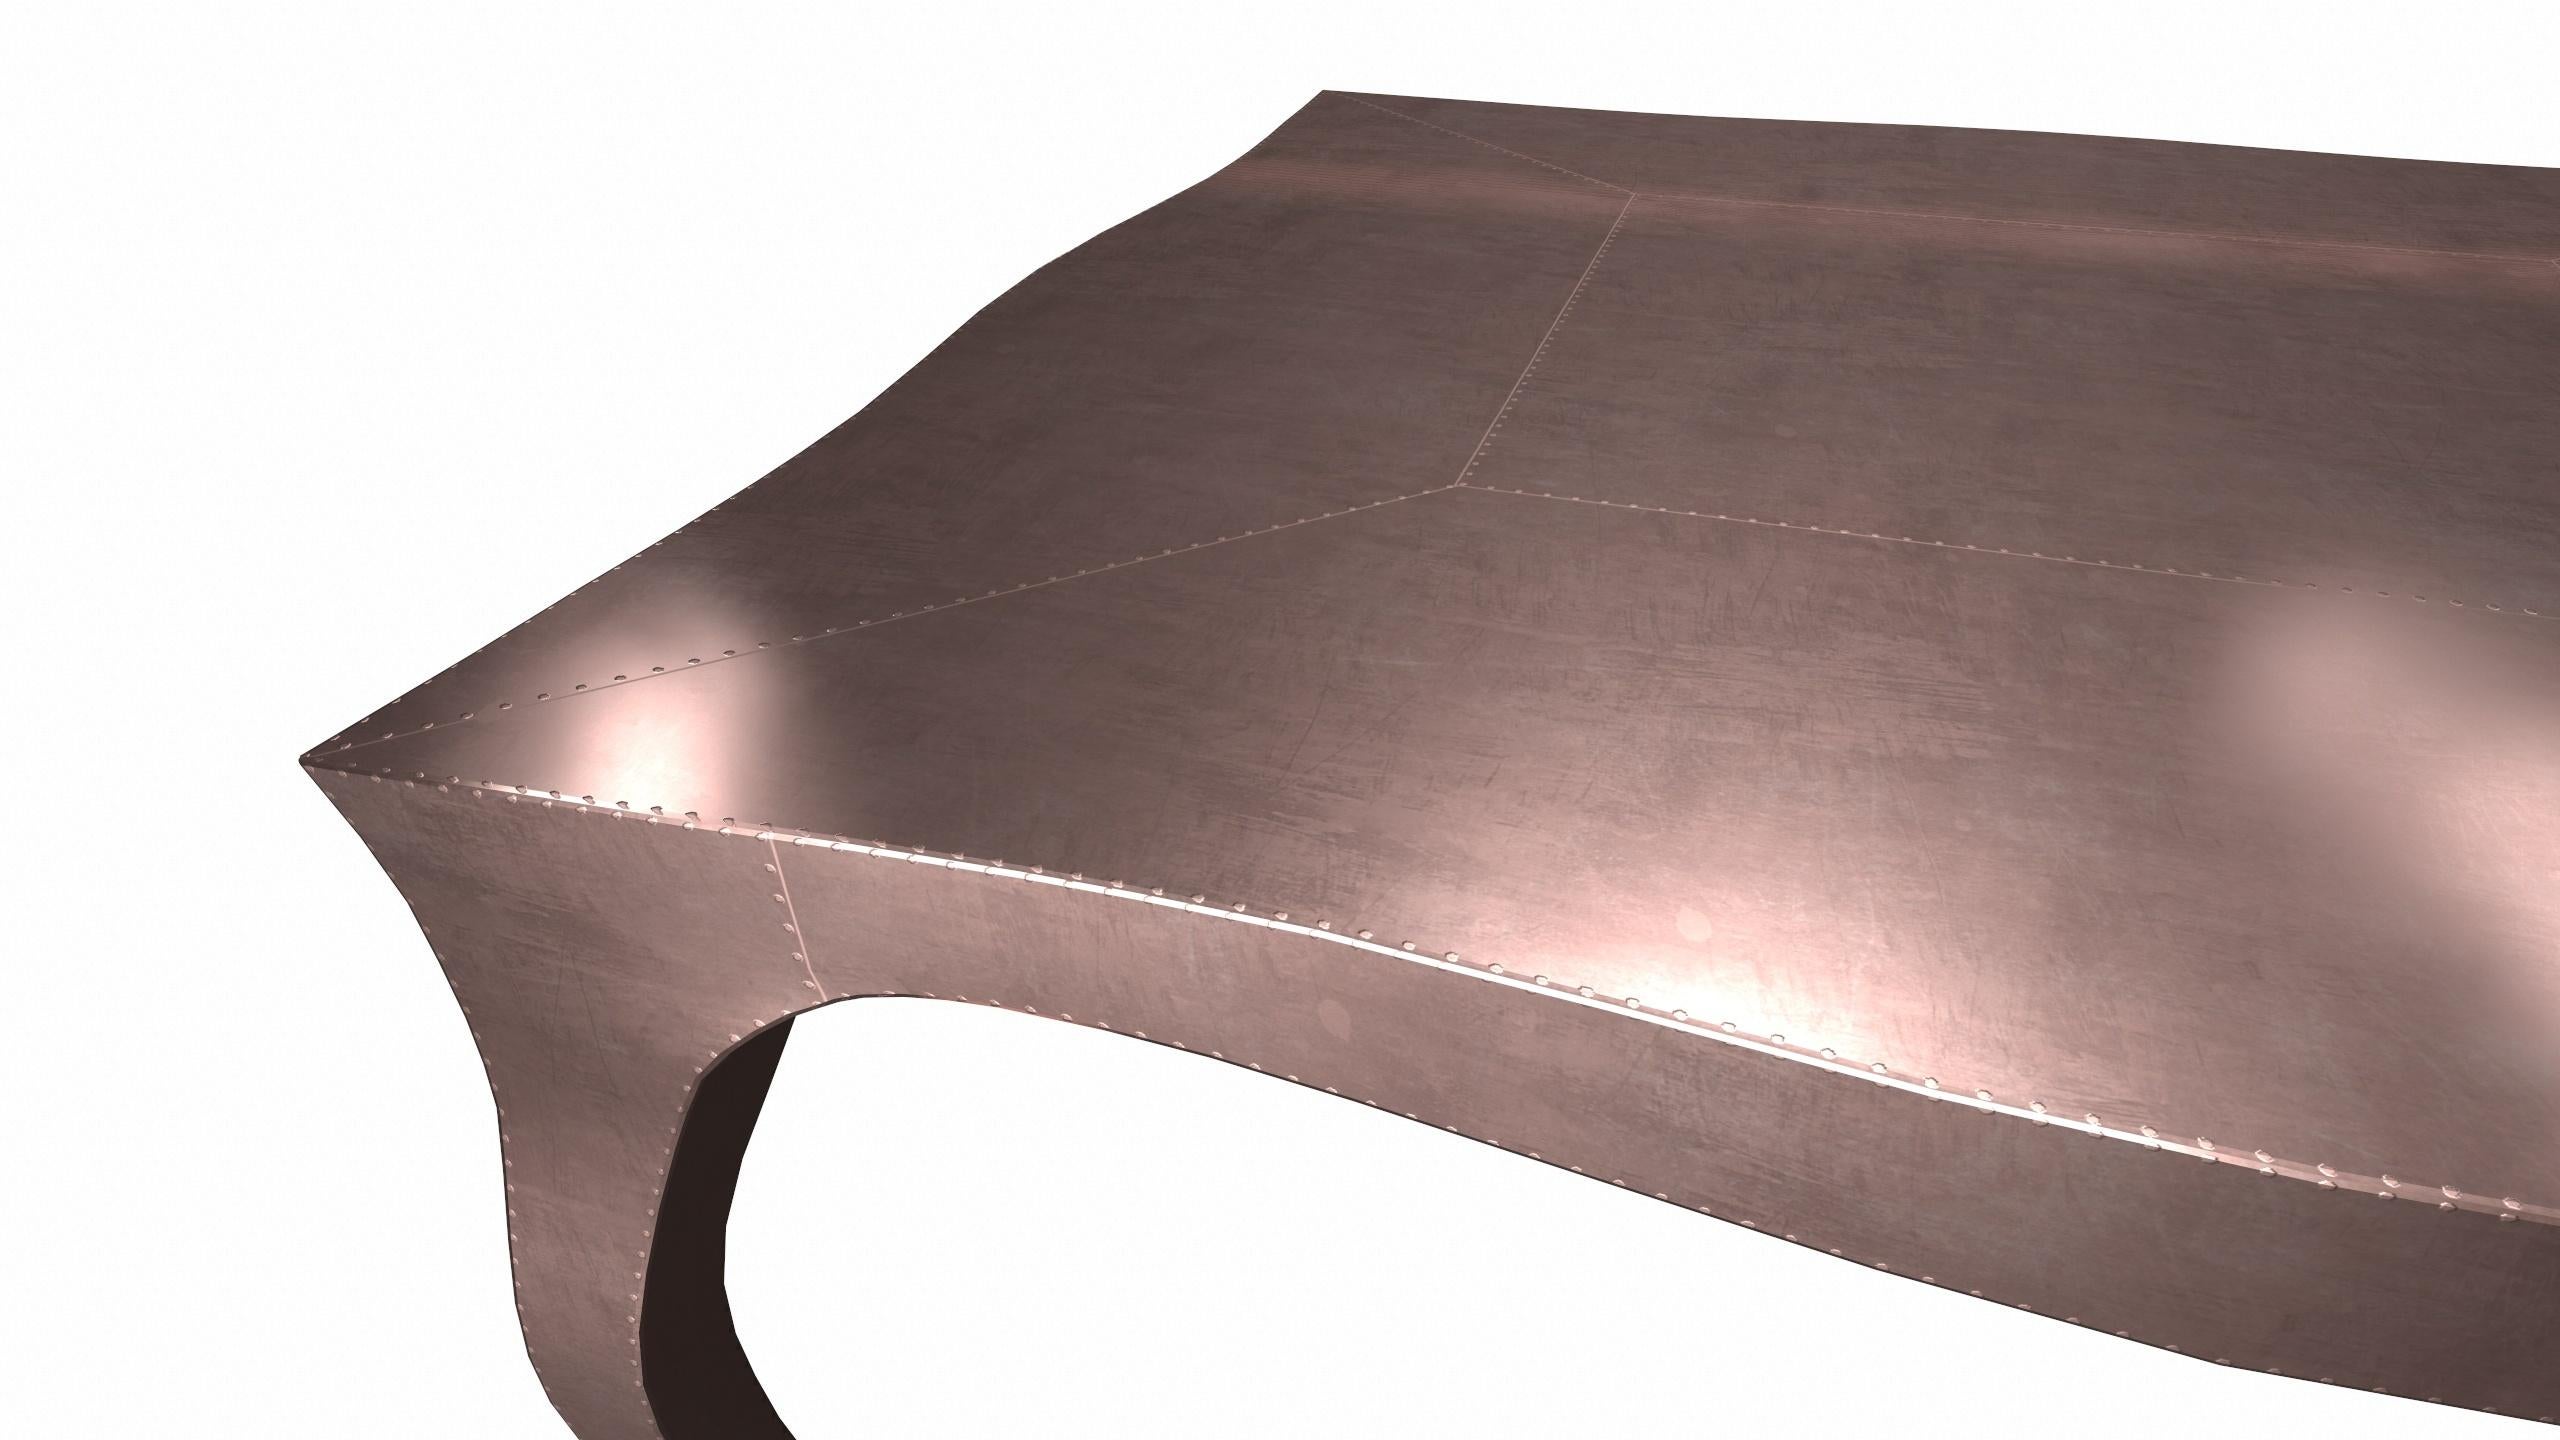 Other Louise Art Decor Nesting Tables Smooth Copper 18.5x18.5x10 inch by Paul M. For Sale